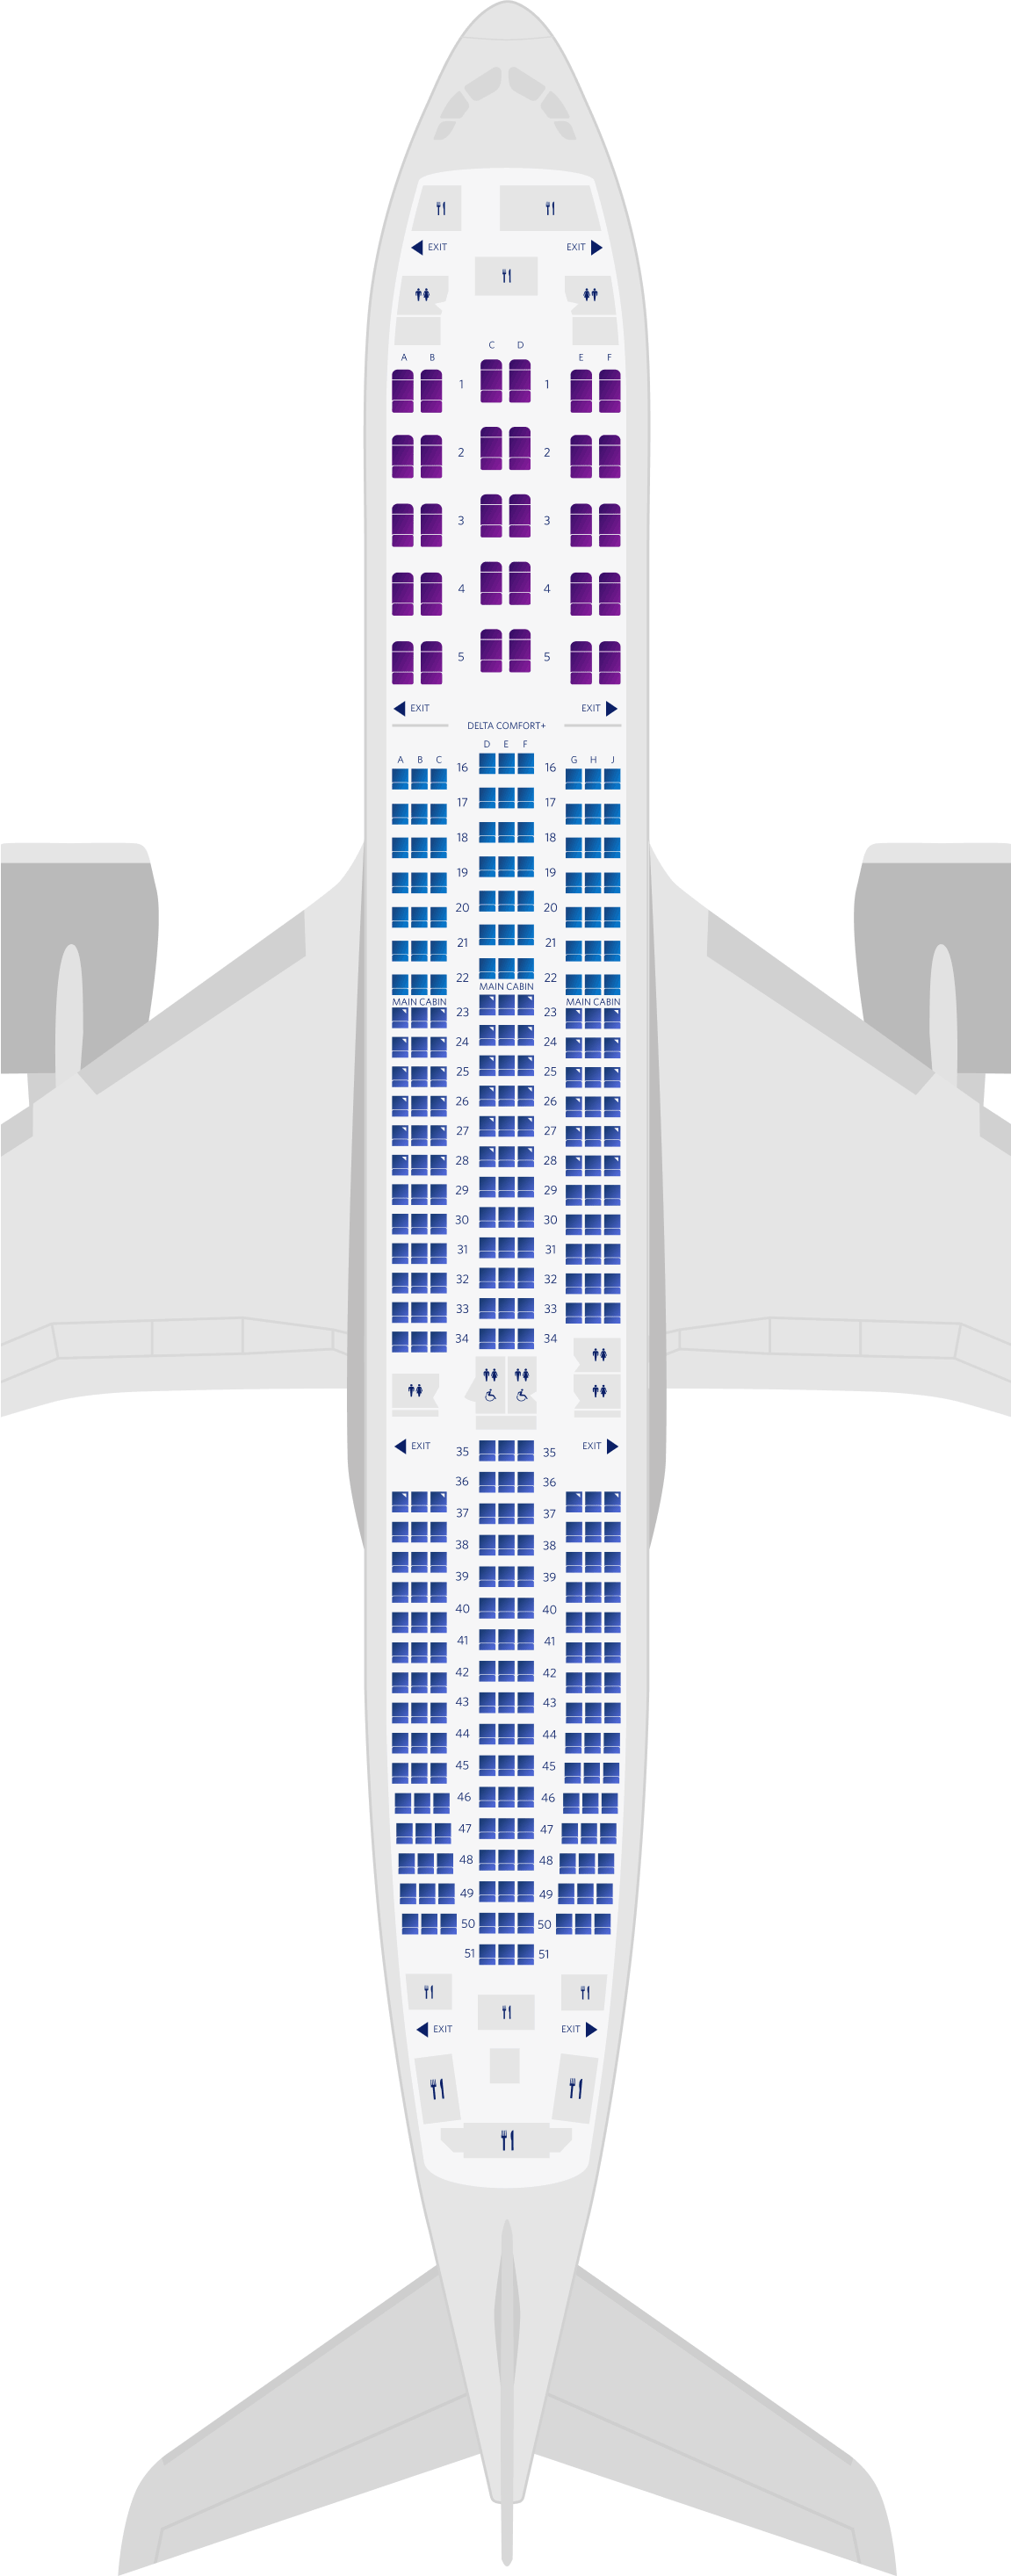 Airbus A350-900 Seat Maps, Specs & Amenities